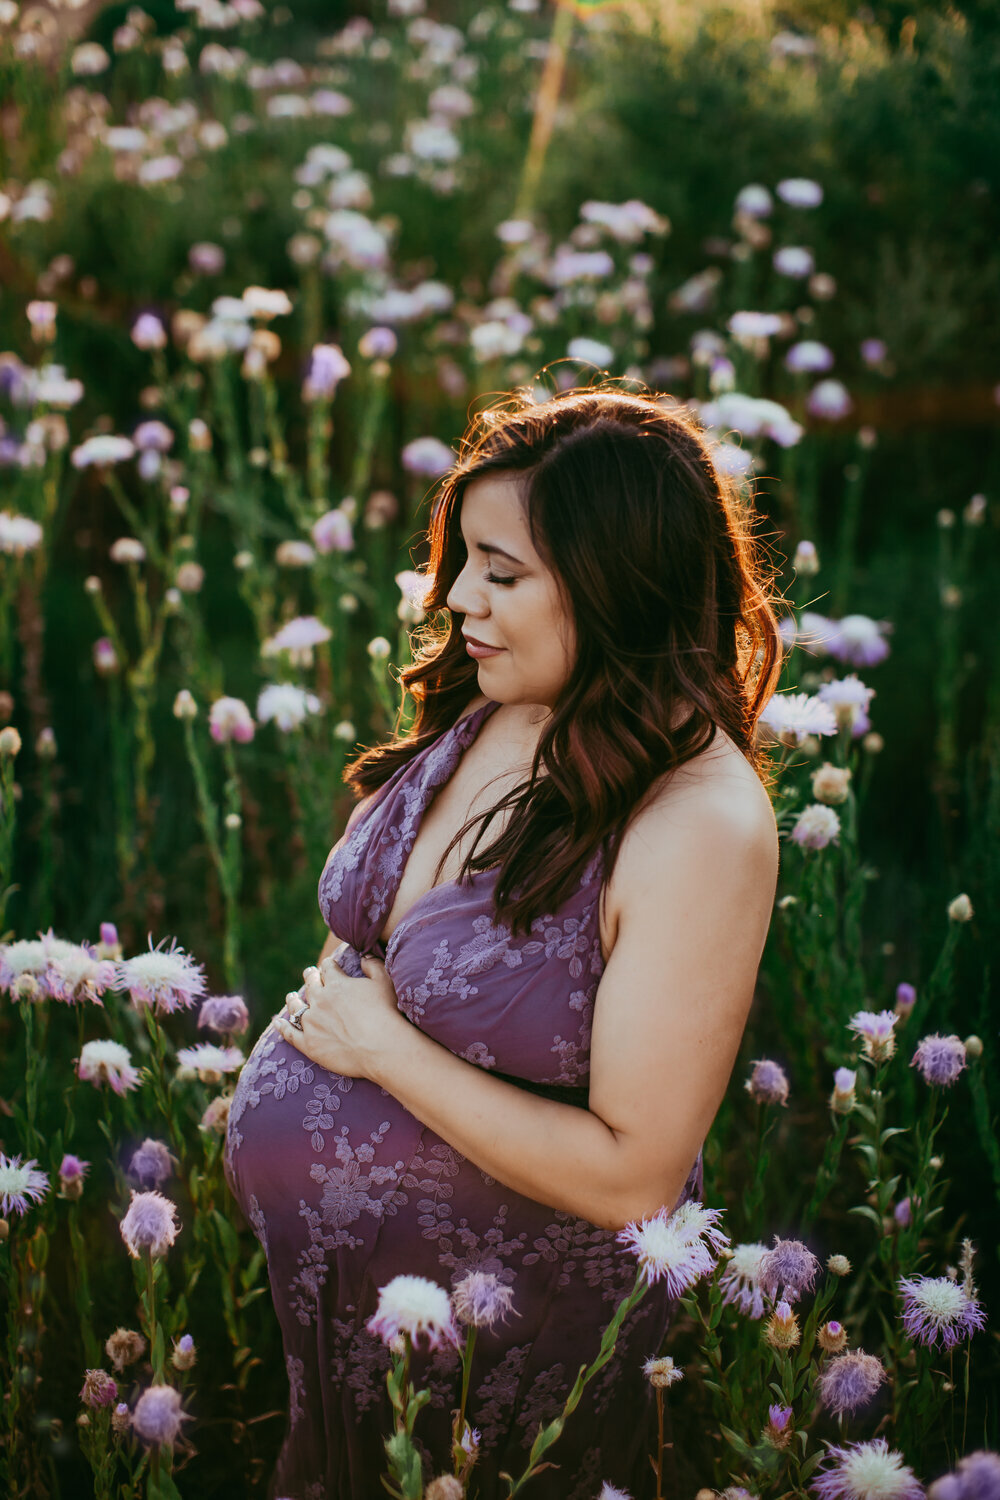  Can we just admire how perfect her maternity dress was for this session! The dress cut and the purple lace was exquisite #tealawardphotography #texasmaternityphotographysession #amarillophotographer #amarilloematernityphotographer #emotionalphotography #lifestylephotography #babyontheway #lifestyles #expectingmom #newaddition #sweetbaby #motherhoodmagic 